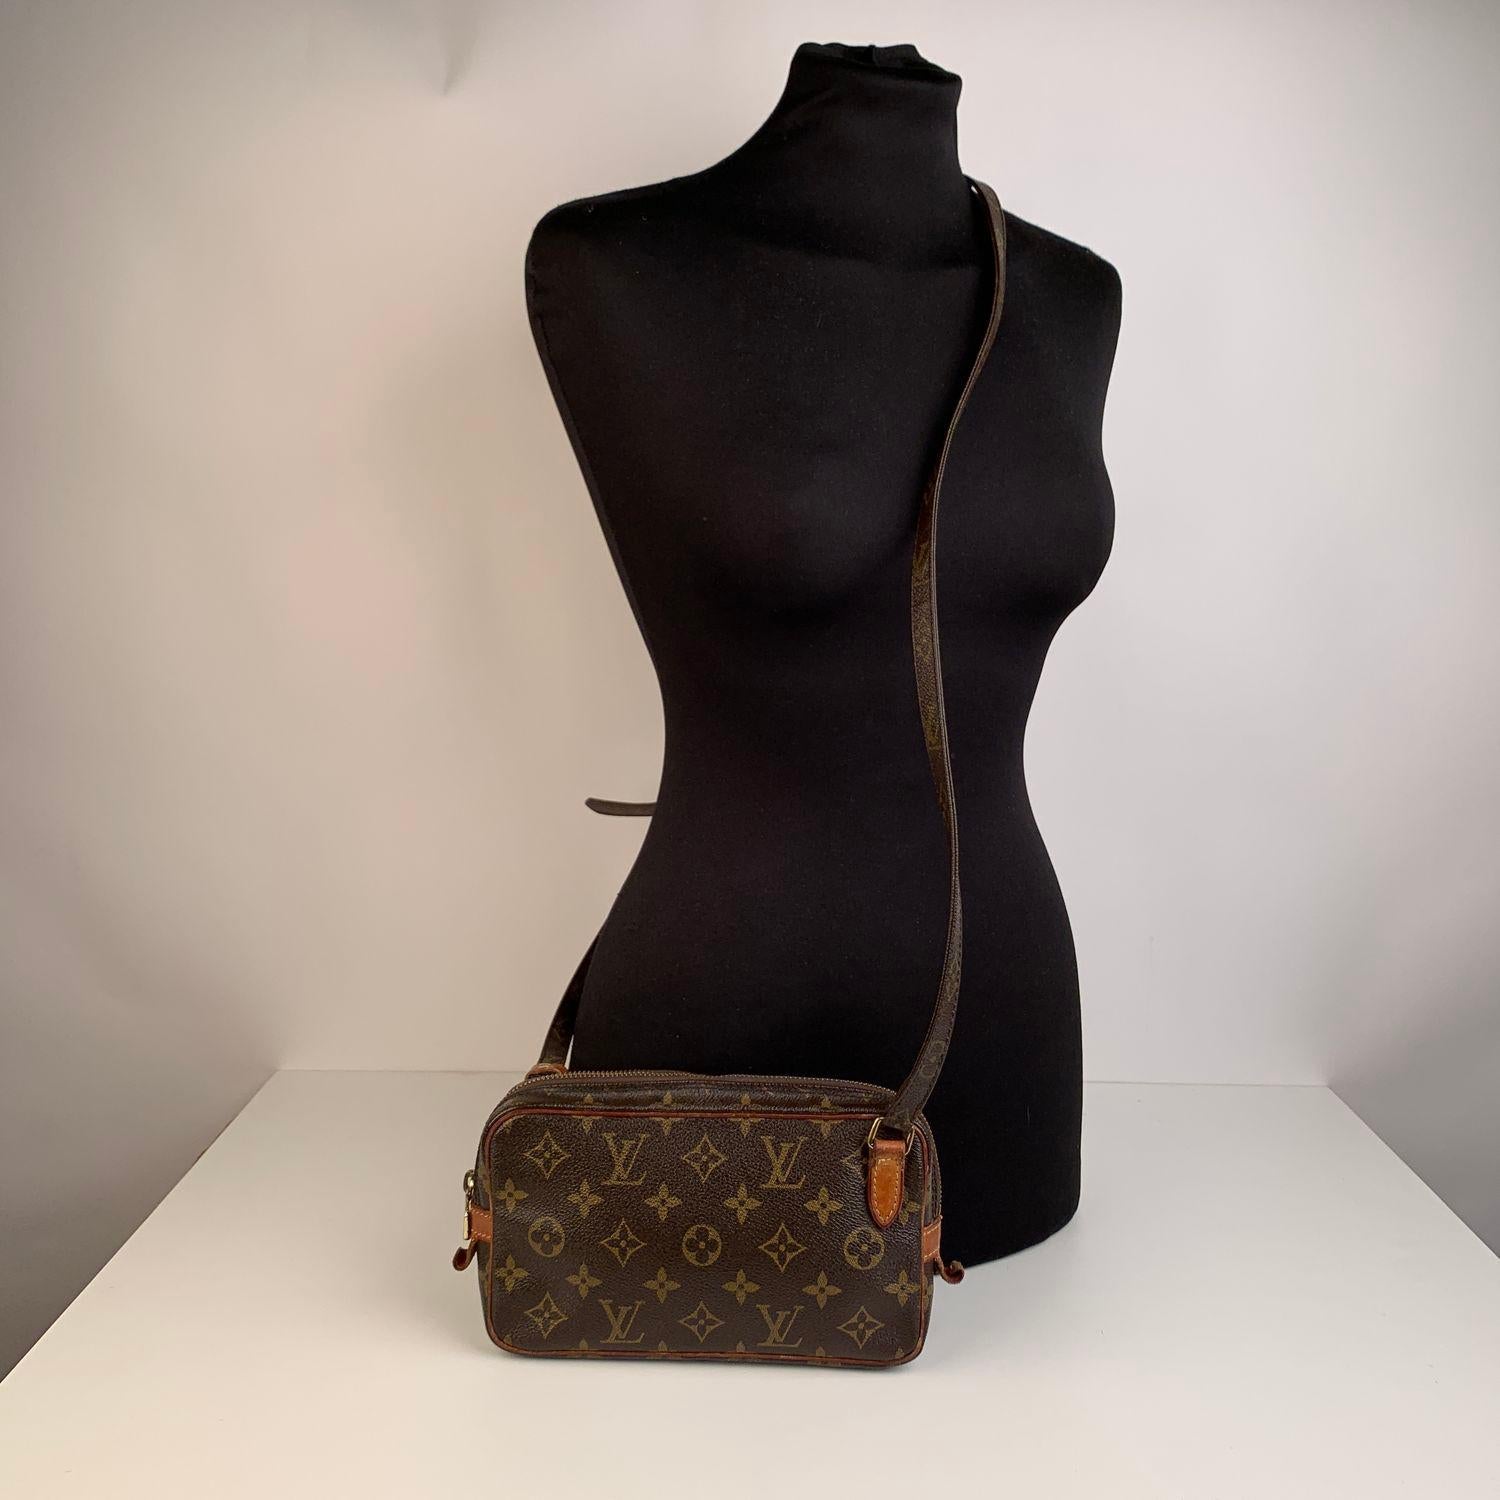 LOUIS VUITTON 'Marly Bandouliere'  crafted in timeless monogram canvas with vacchetta leather trim. Upper zipper closure. Golden brass hardware and adjustable canvas shoulder strap. Brown cross-grain leather lining.  'LOUIS VUITTON Paris - made in